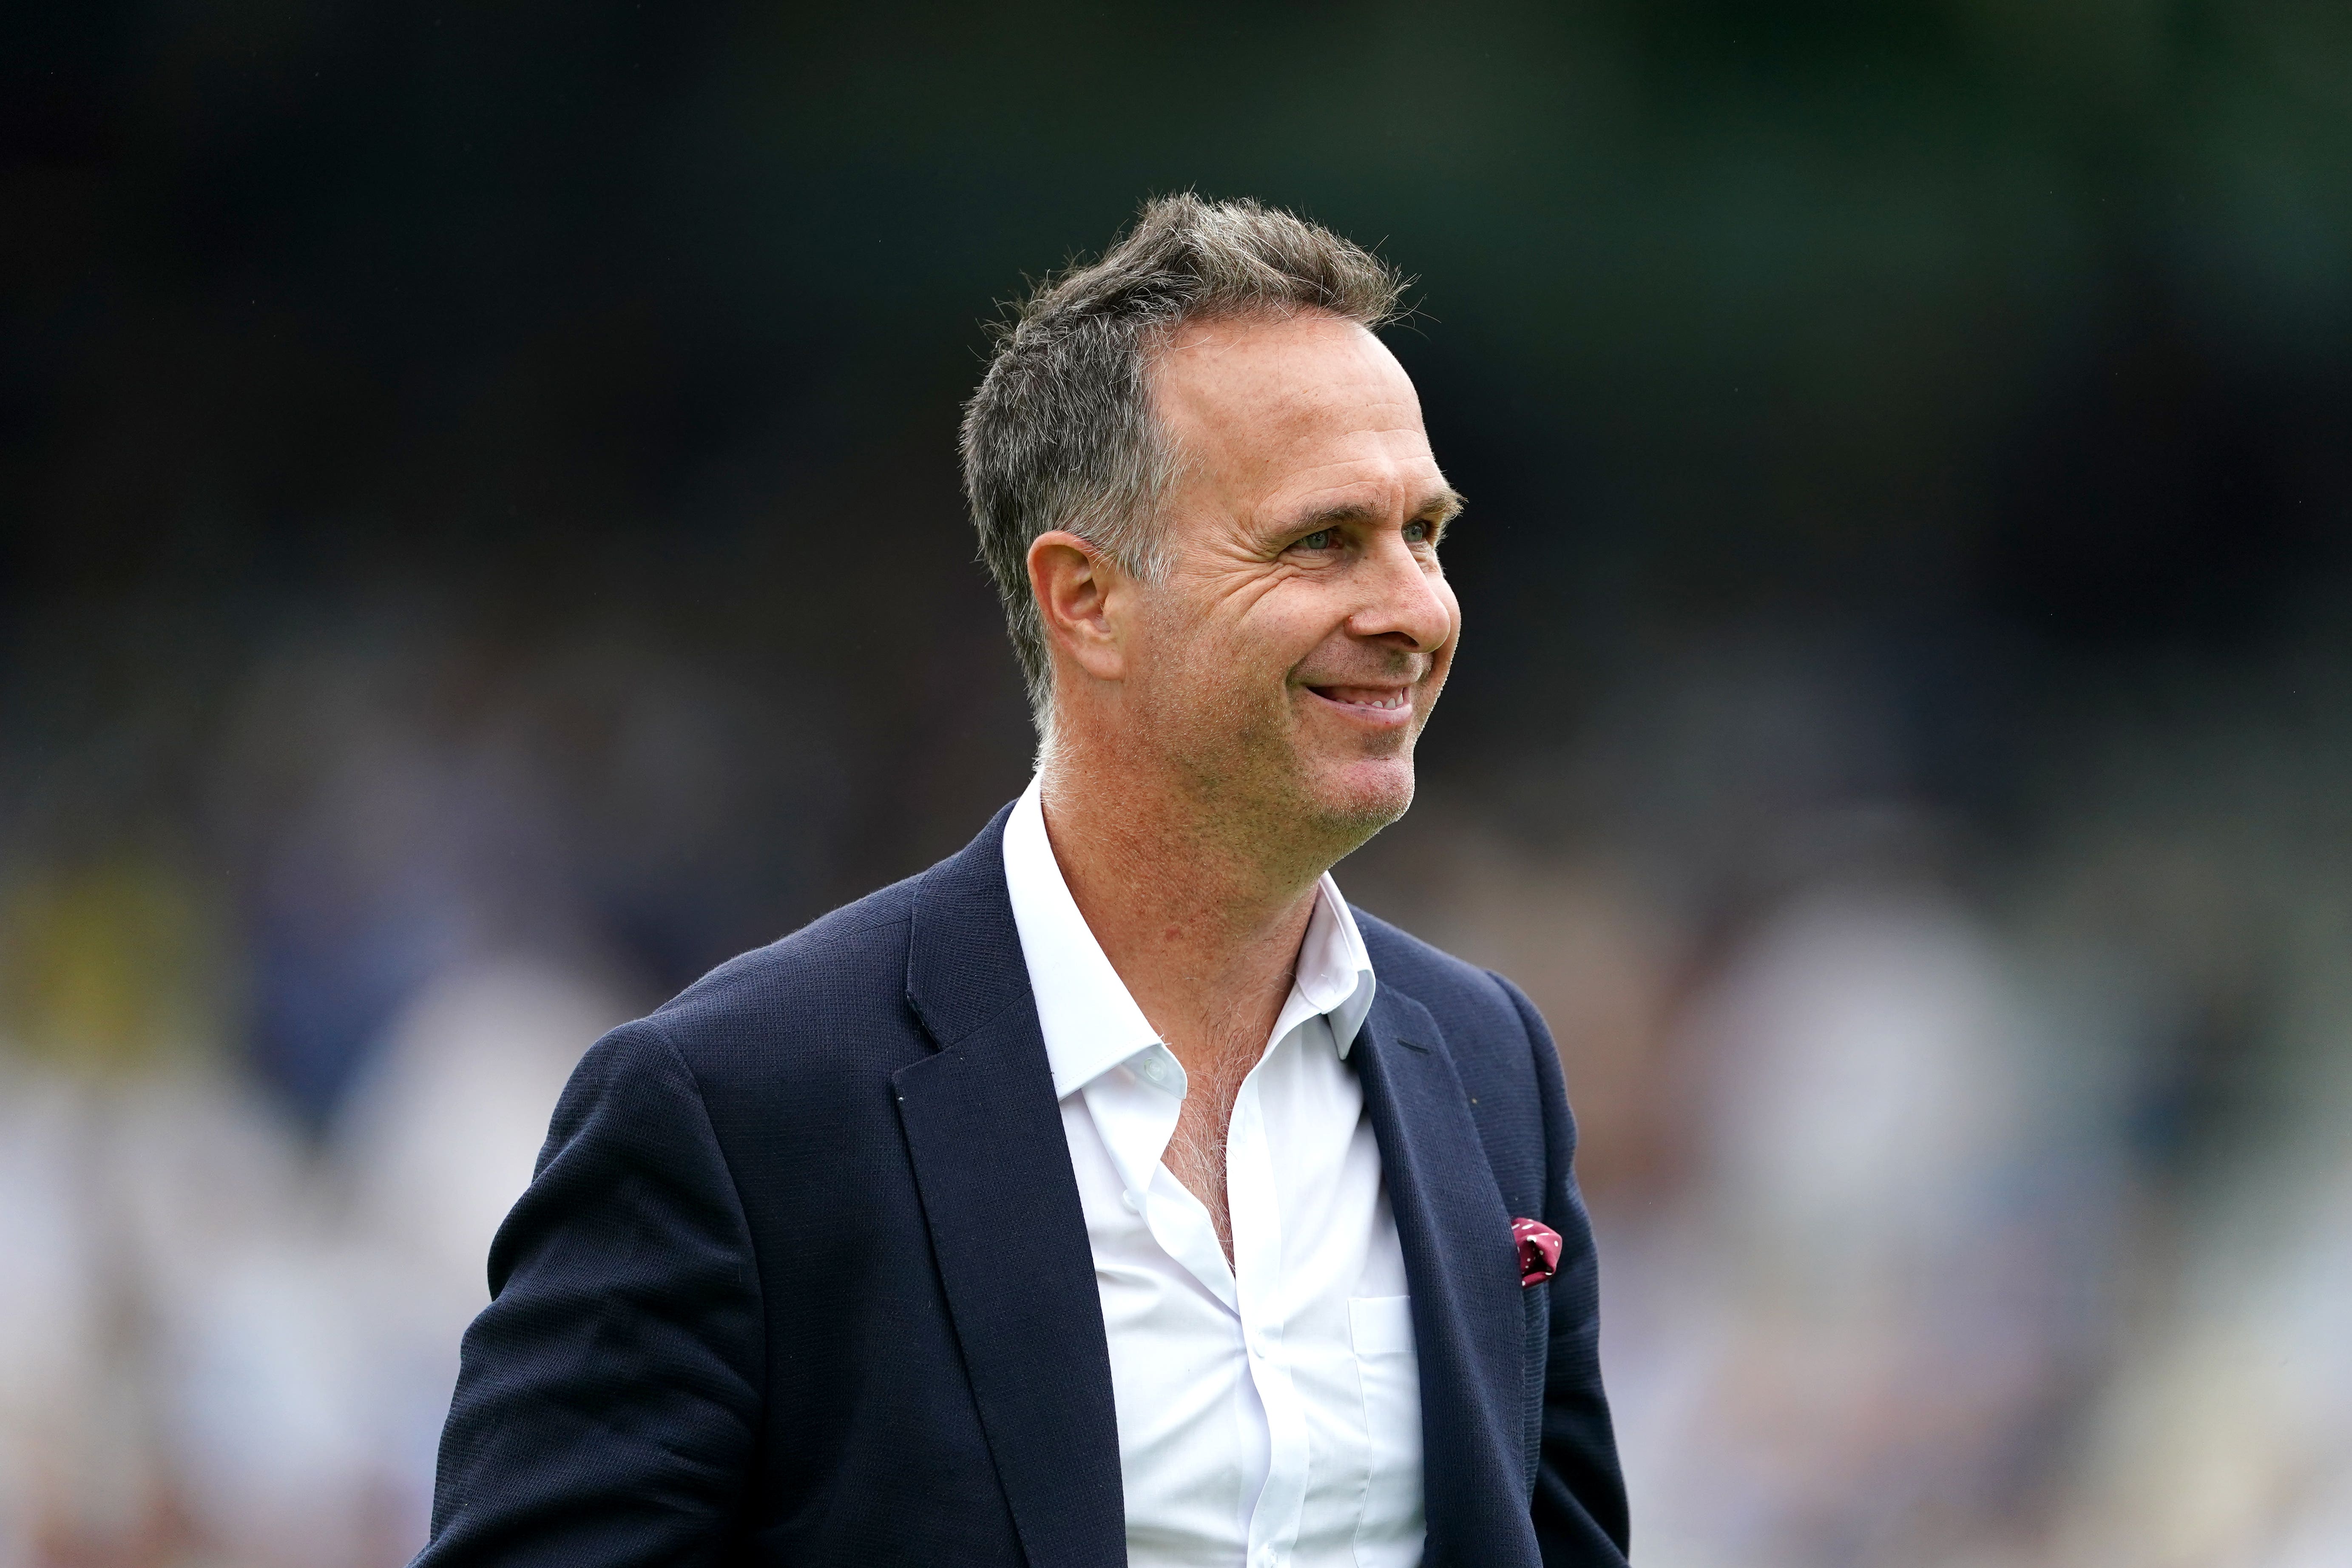 Former England cricket player Michael Vaughan said there is still a lot to play for in the final Ashes test (Mike Egerton, PA)